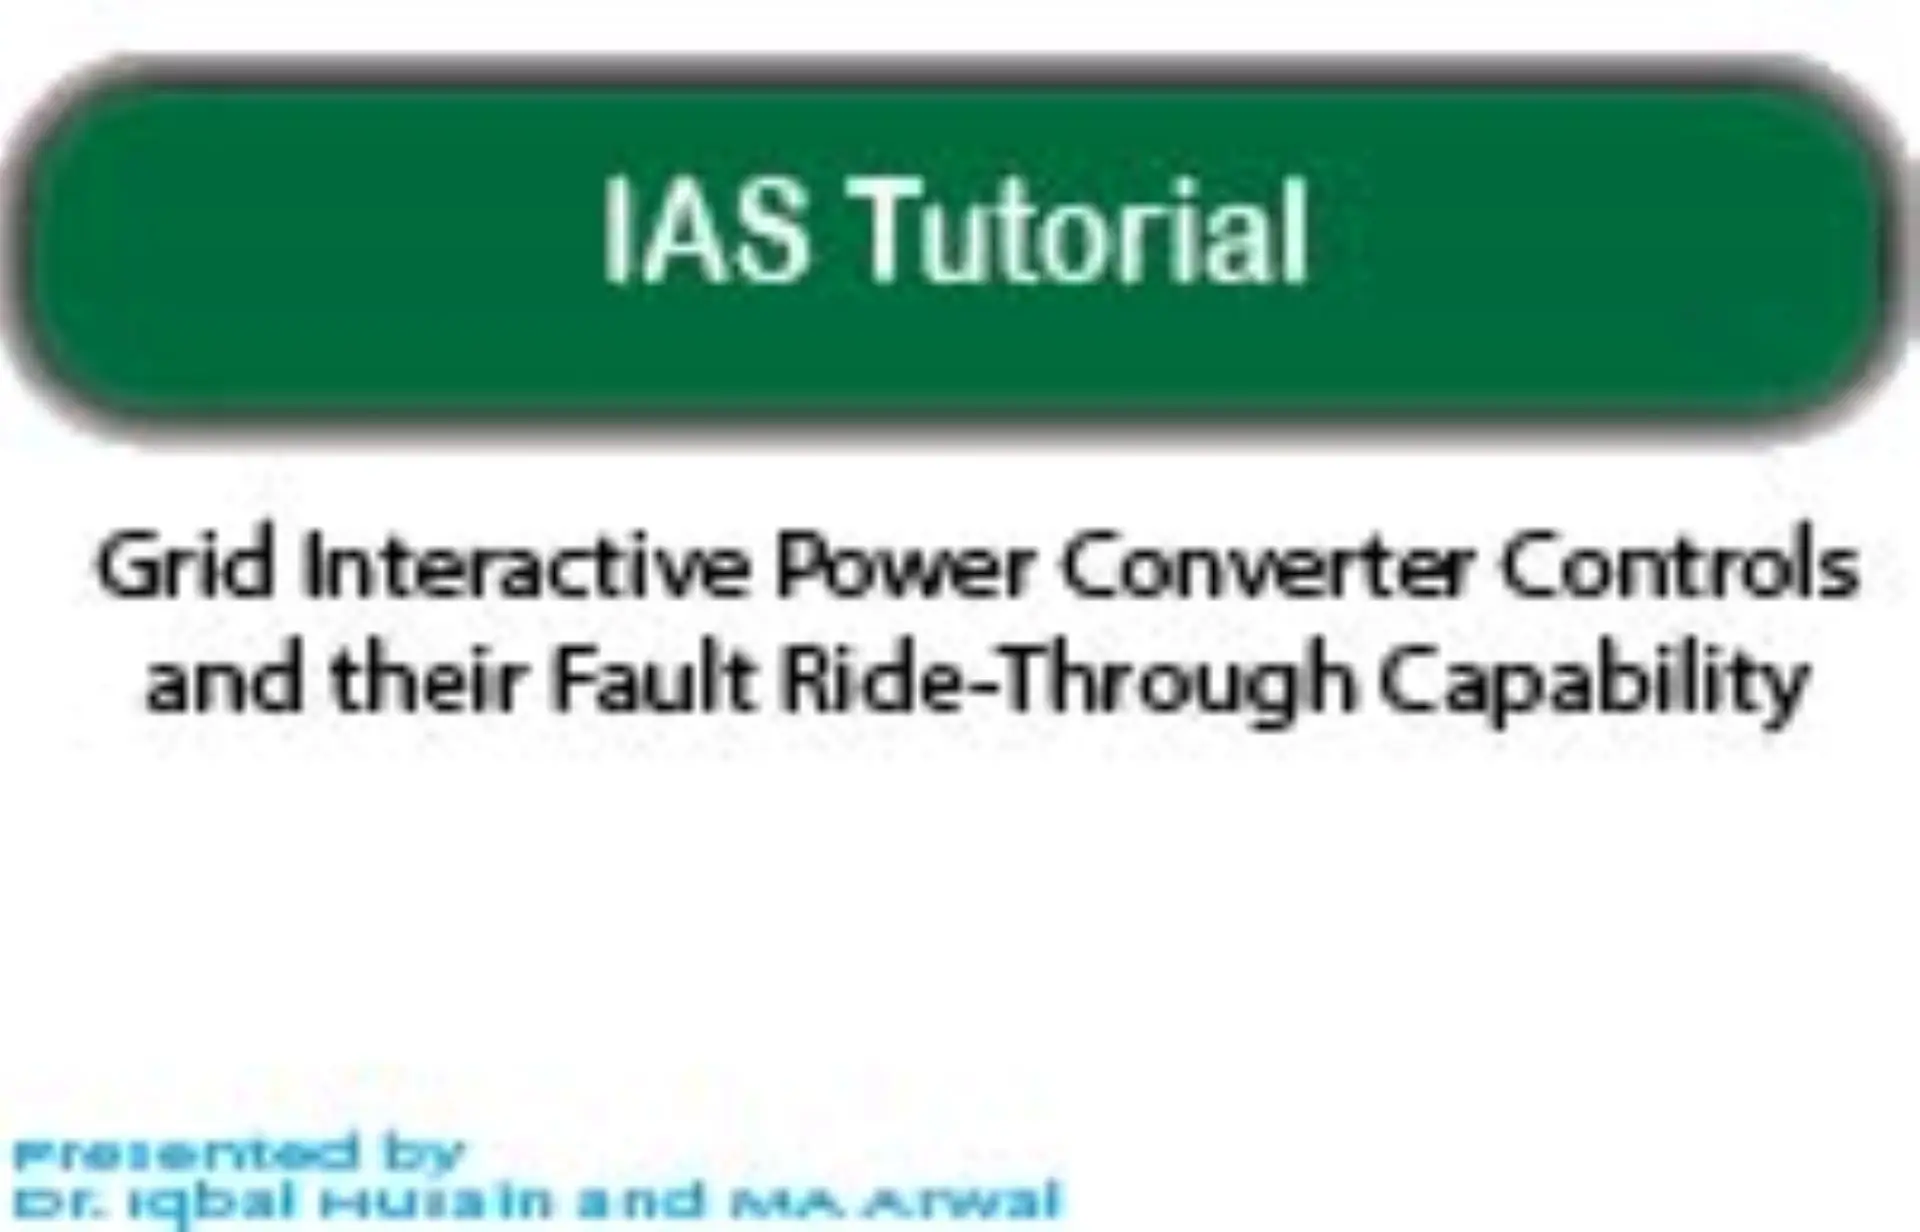 Grid Interactive Power Converter Controls and their Fault Ride-Through Capability